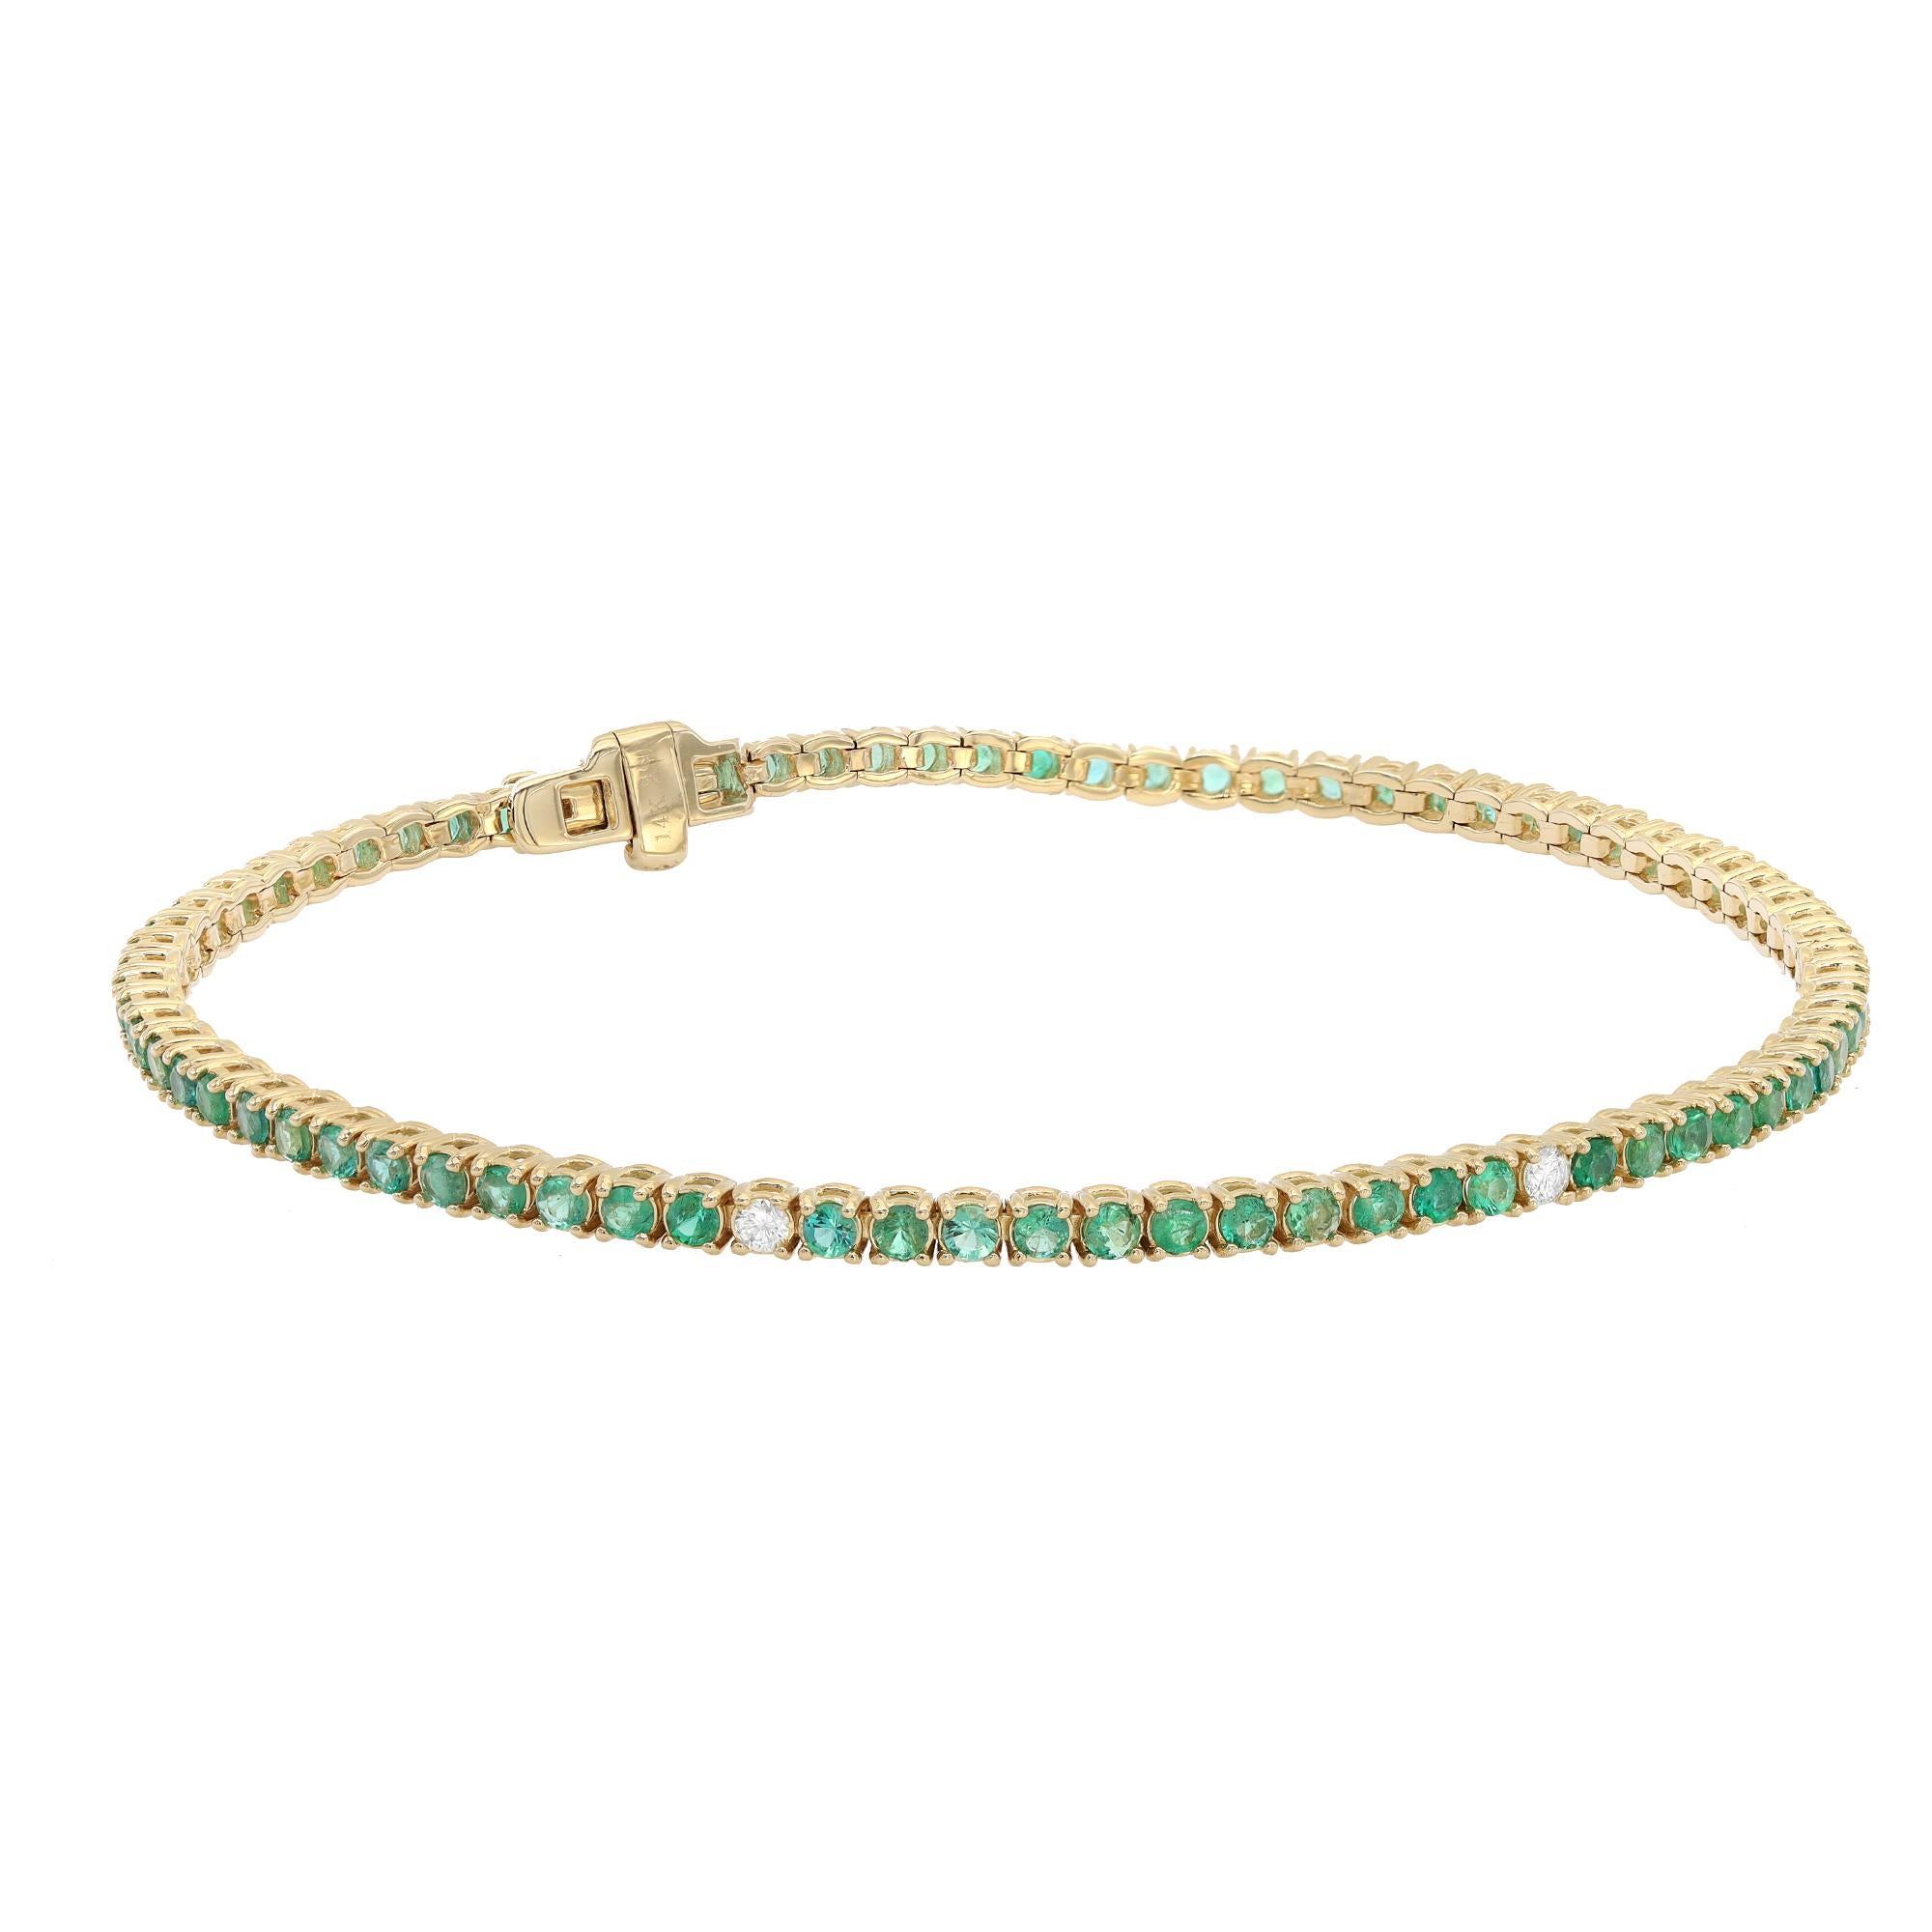 This beautifully crafted tennis bracelet features round cut green Emeralds and diamonds encrusted in four prong setting. Crafted in 14k yellow gold. Total diamond weight: 0.09 carat. Diamond Quality: G-H color and VS-SI clarity. Total emerald